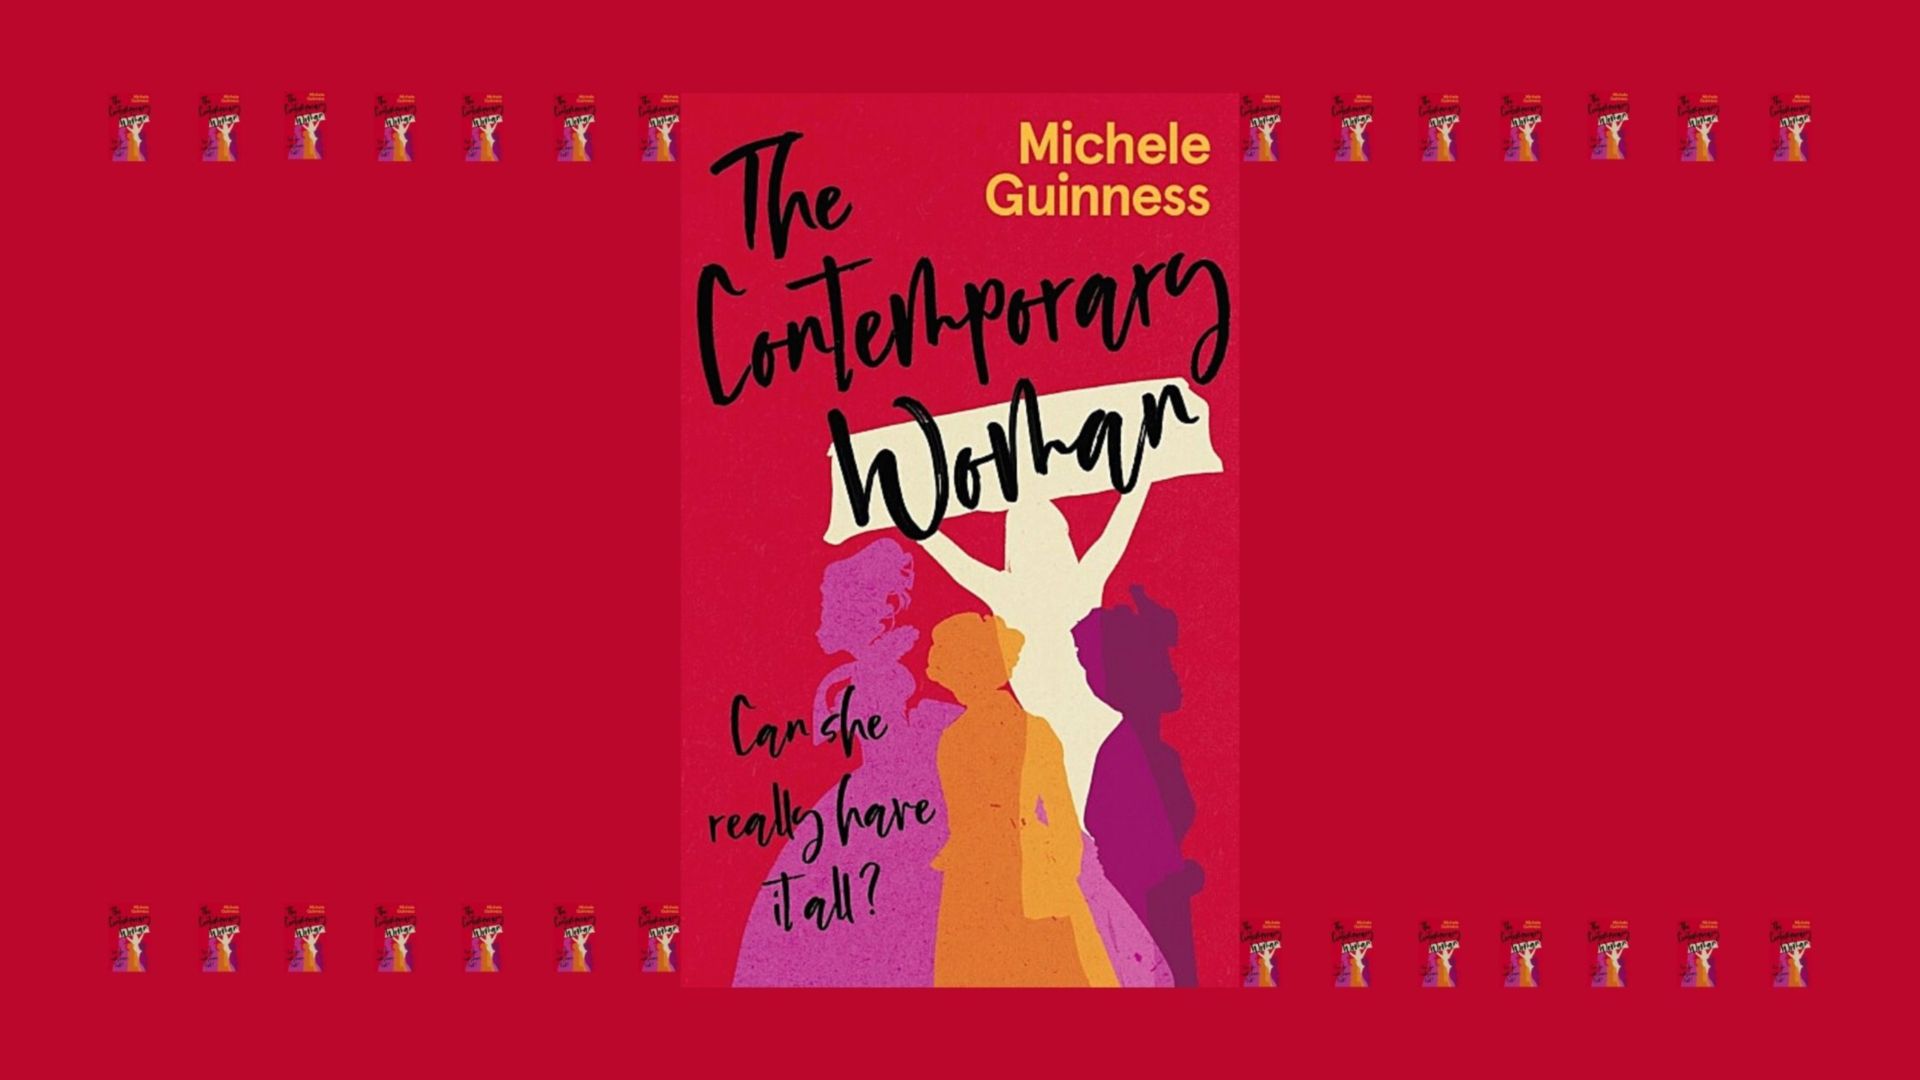 A Review of 'The Contemporary Woman' by Michele Guinness